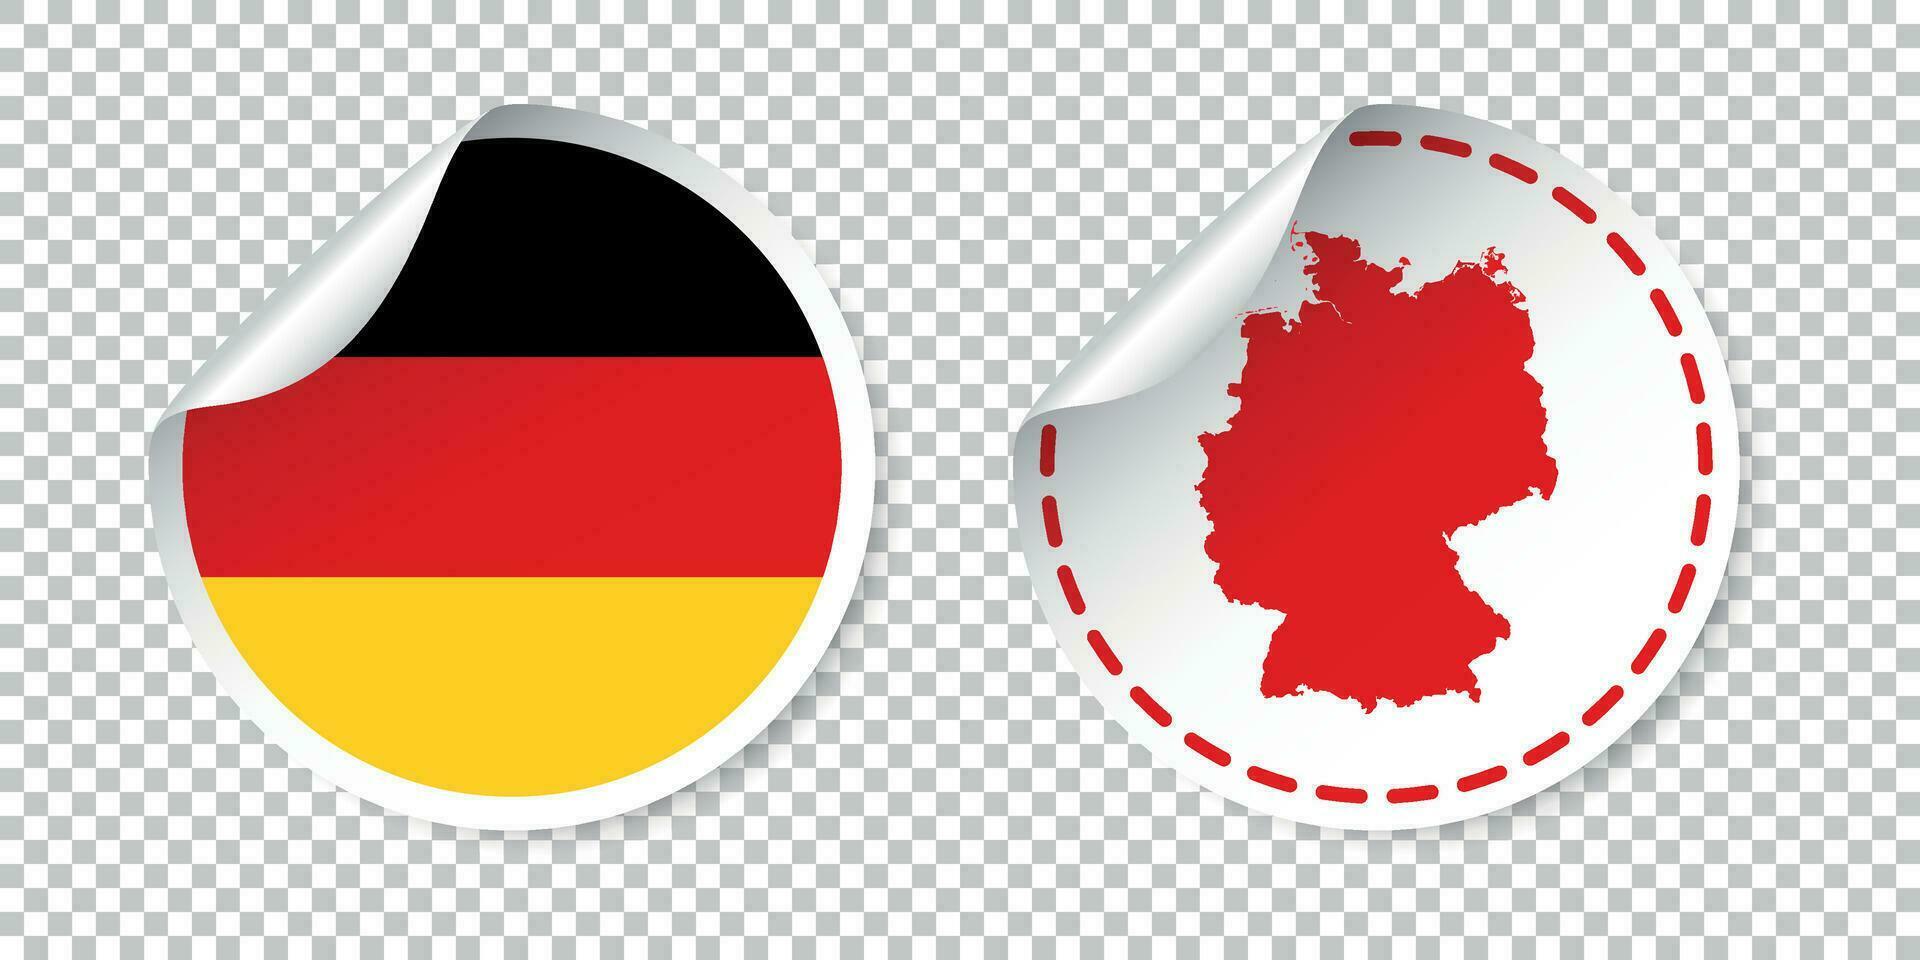 Germany sticker with flag and map. Label, round tag with country. Vector illustration on isolated background.